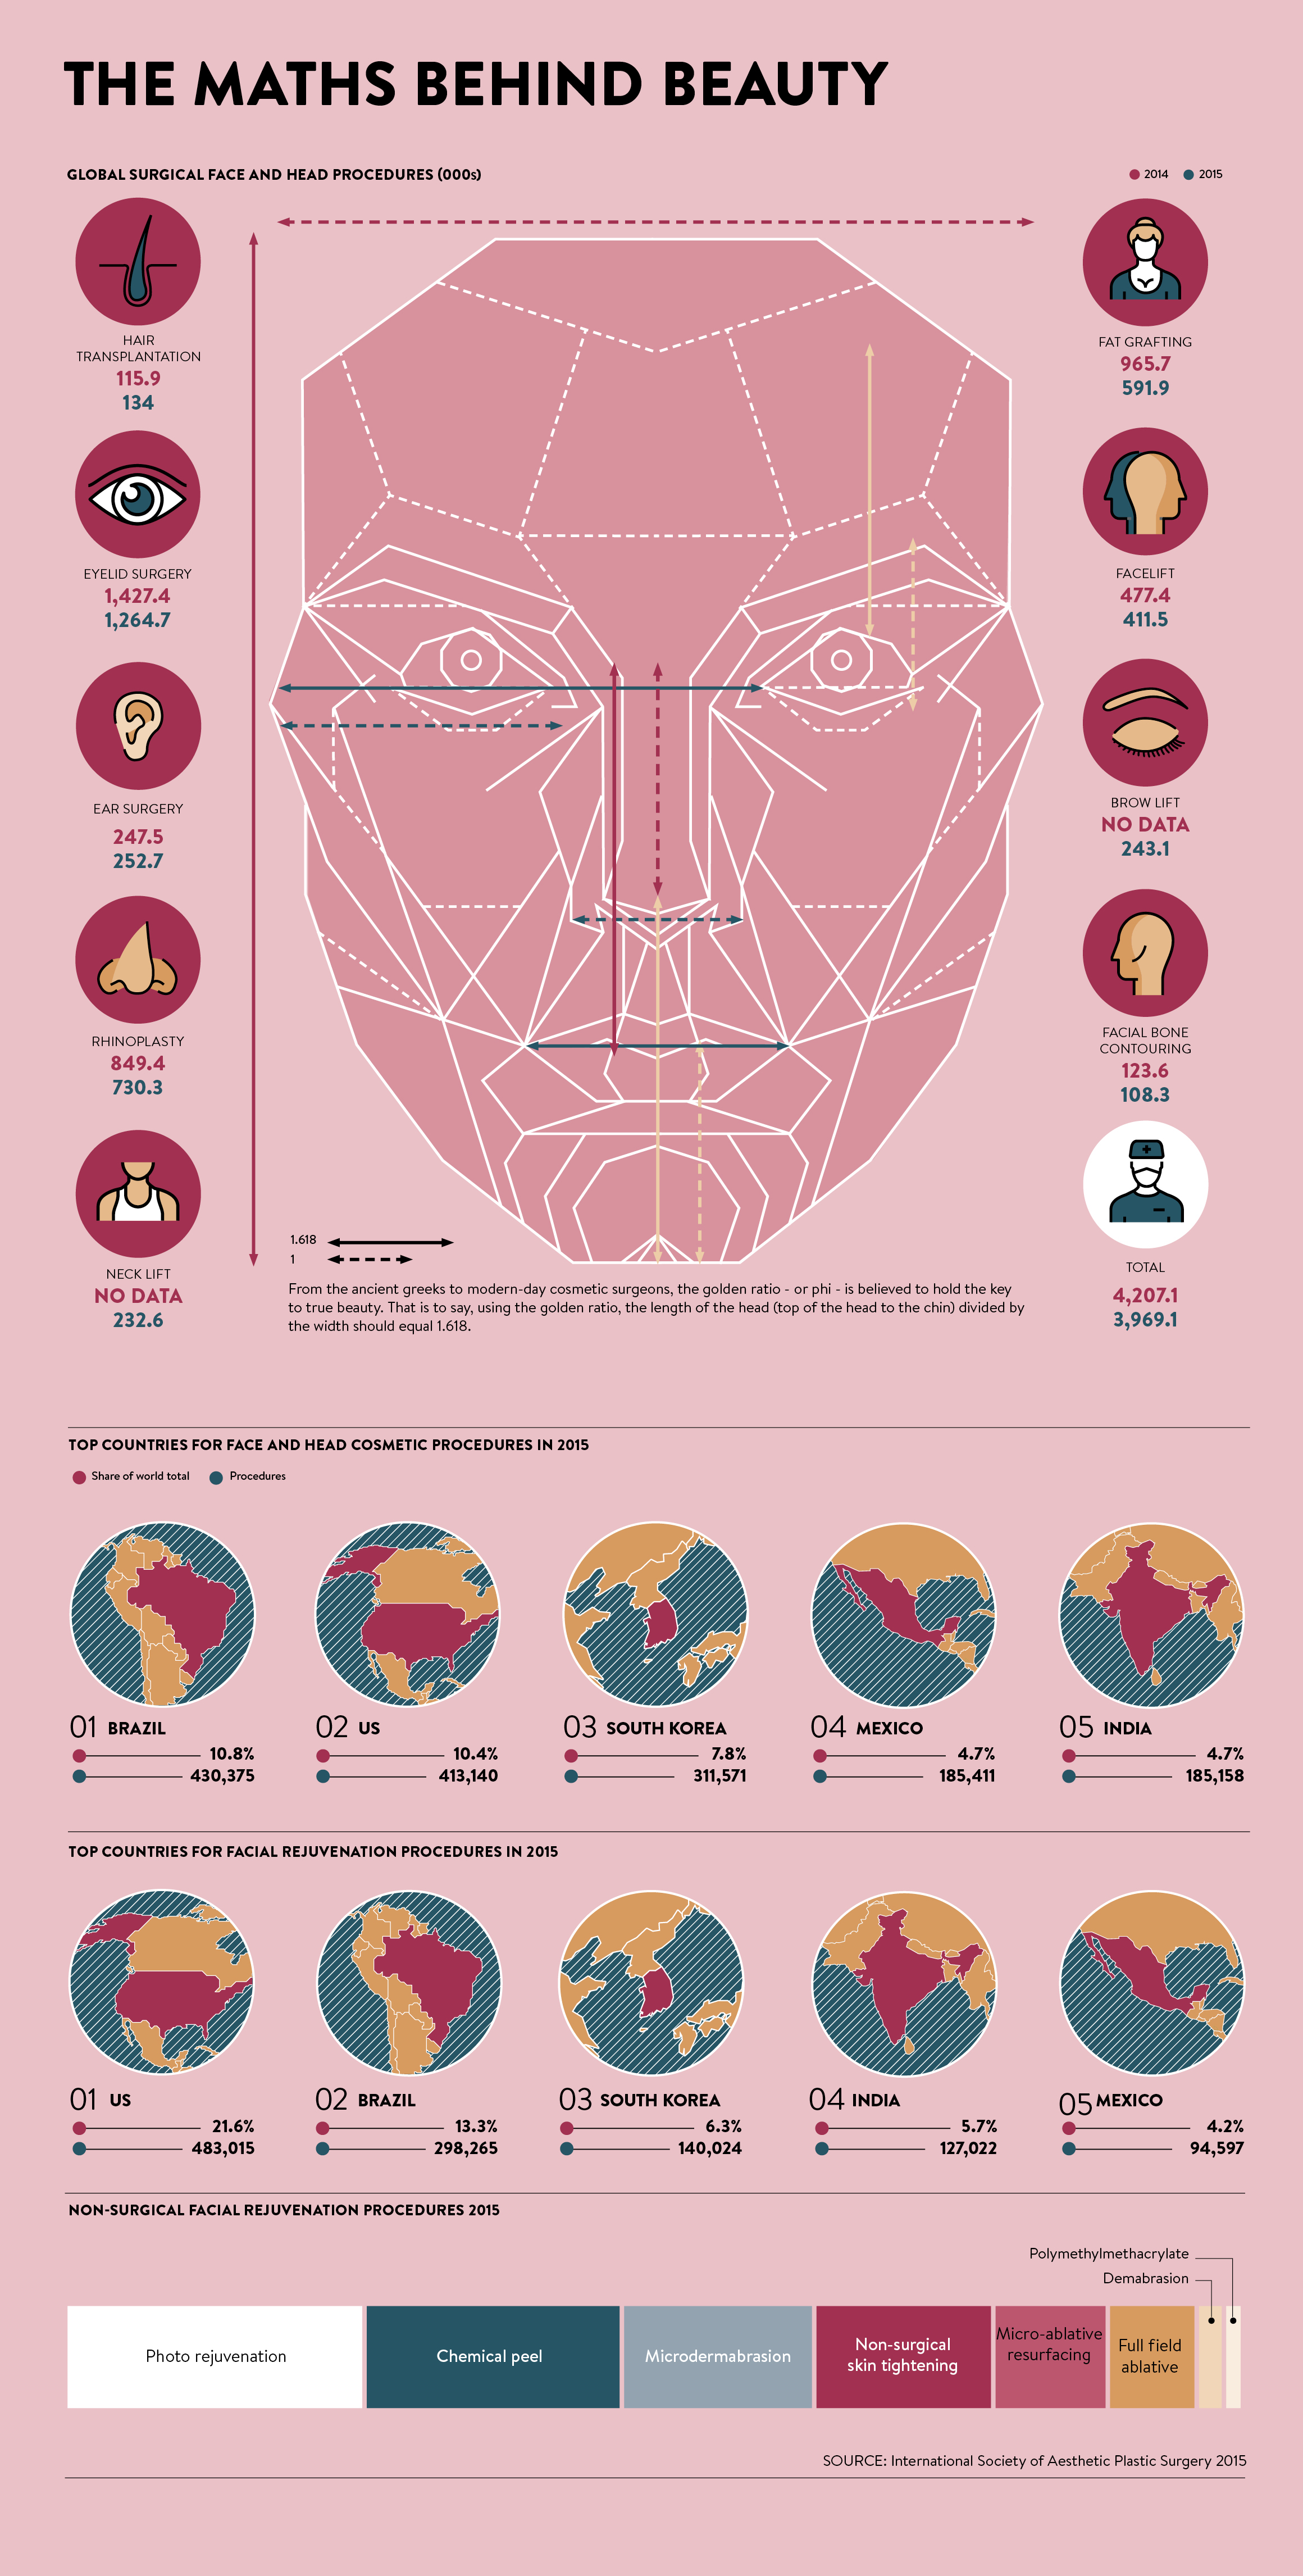 The maths behind beauty infographic